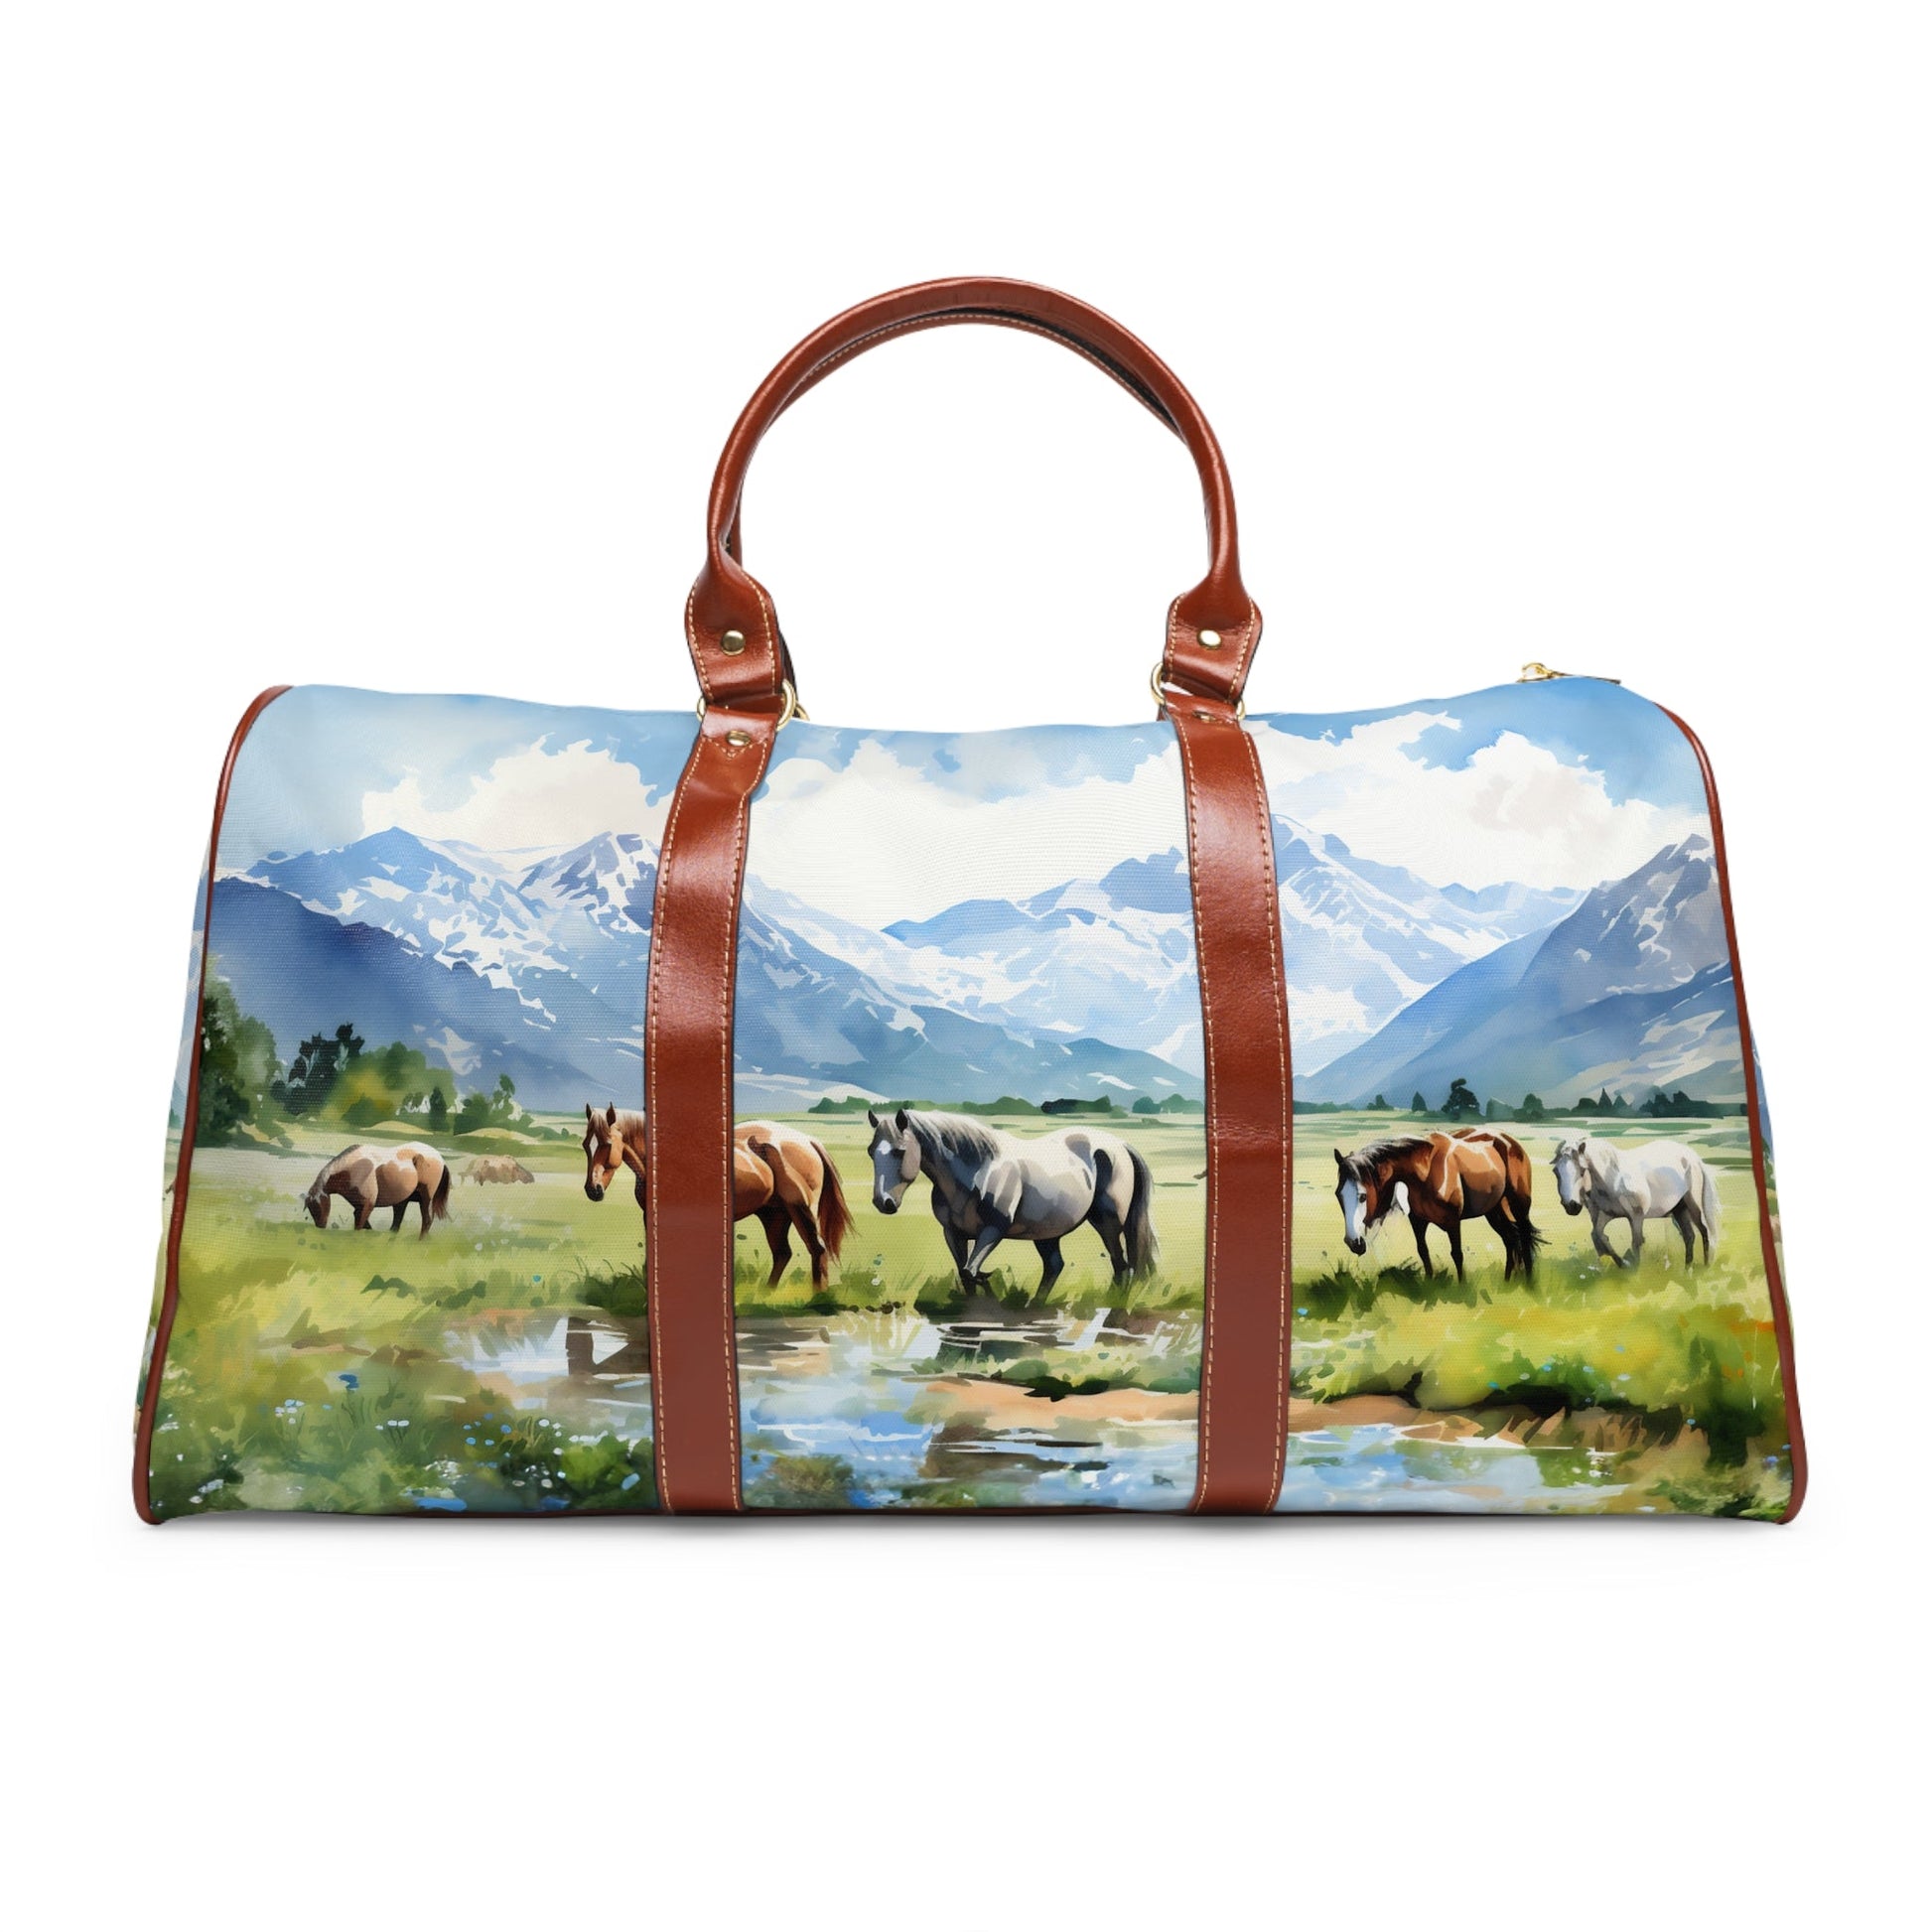 Wild Horses Art Travel Bag - Bigger than most duffle bags, tote bags and even most weekender bags!